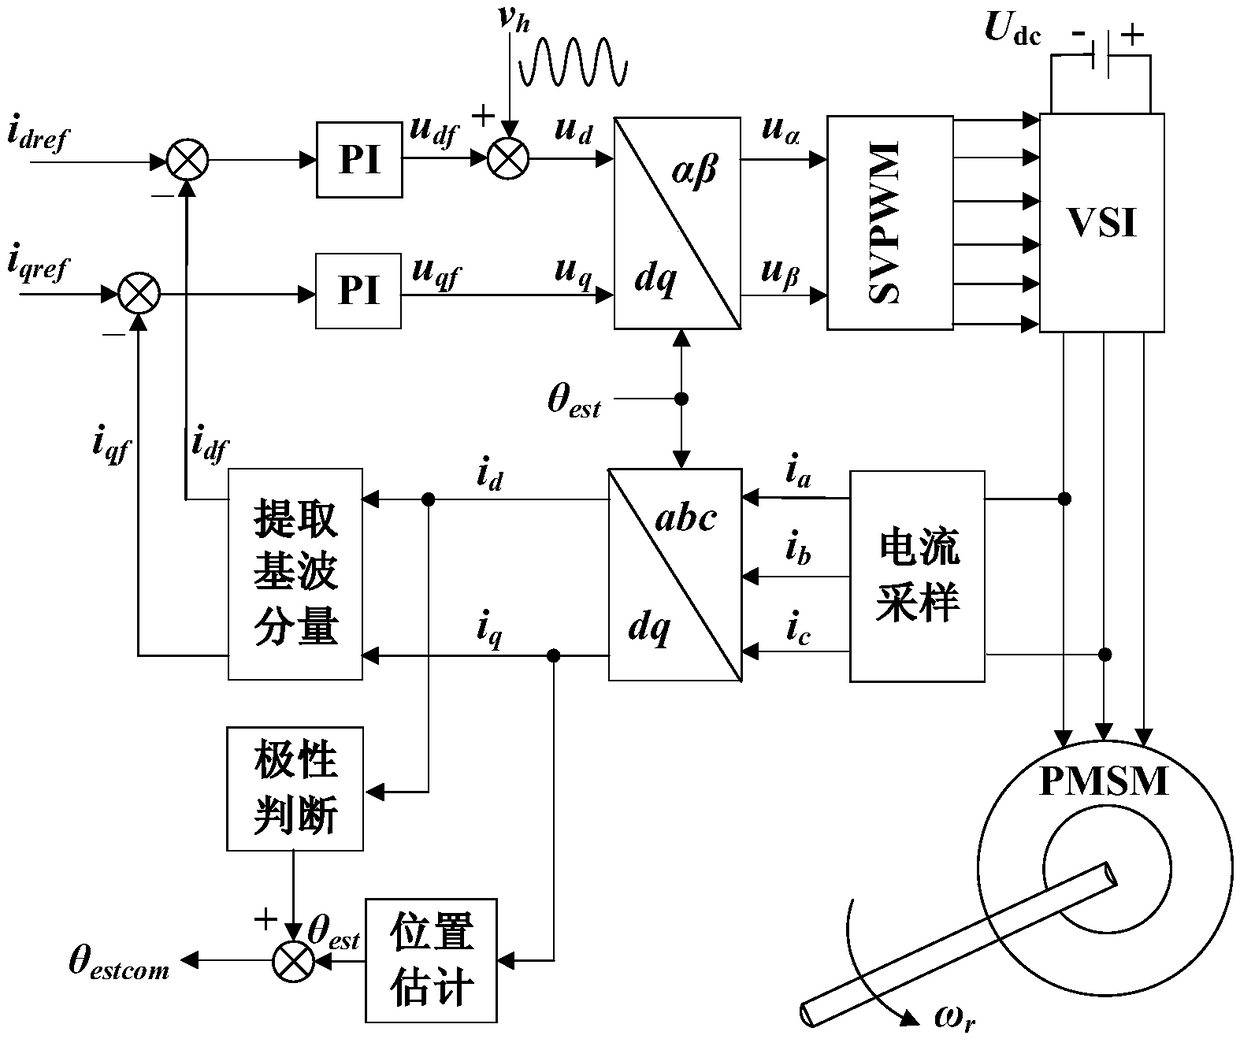 Permanent magnet synchronous motor sensorless control method based on pulse high-frequency injection